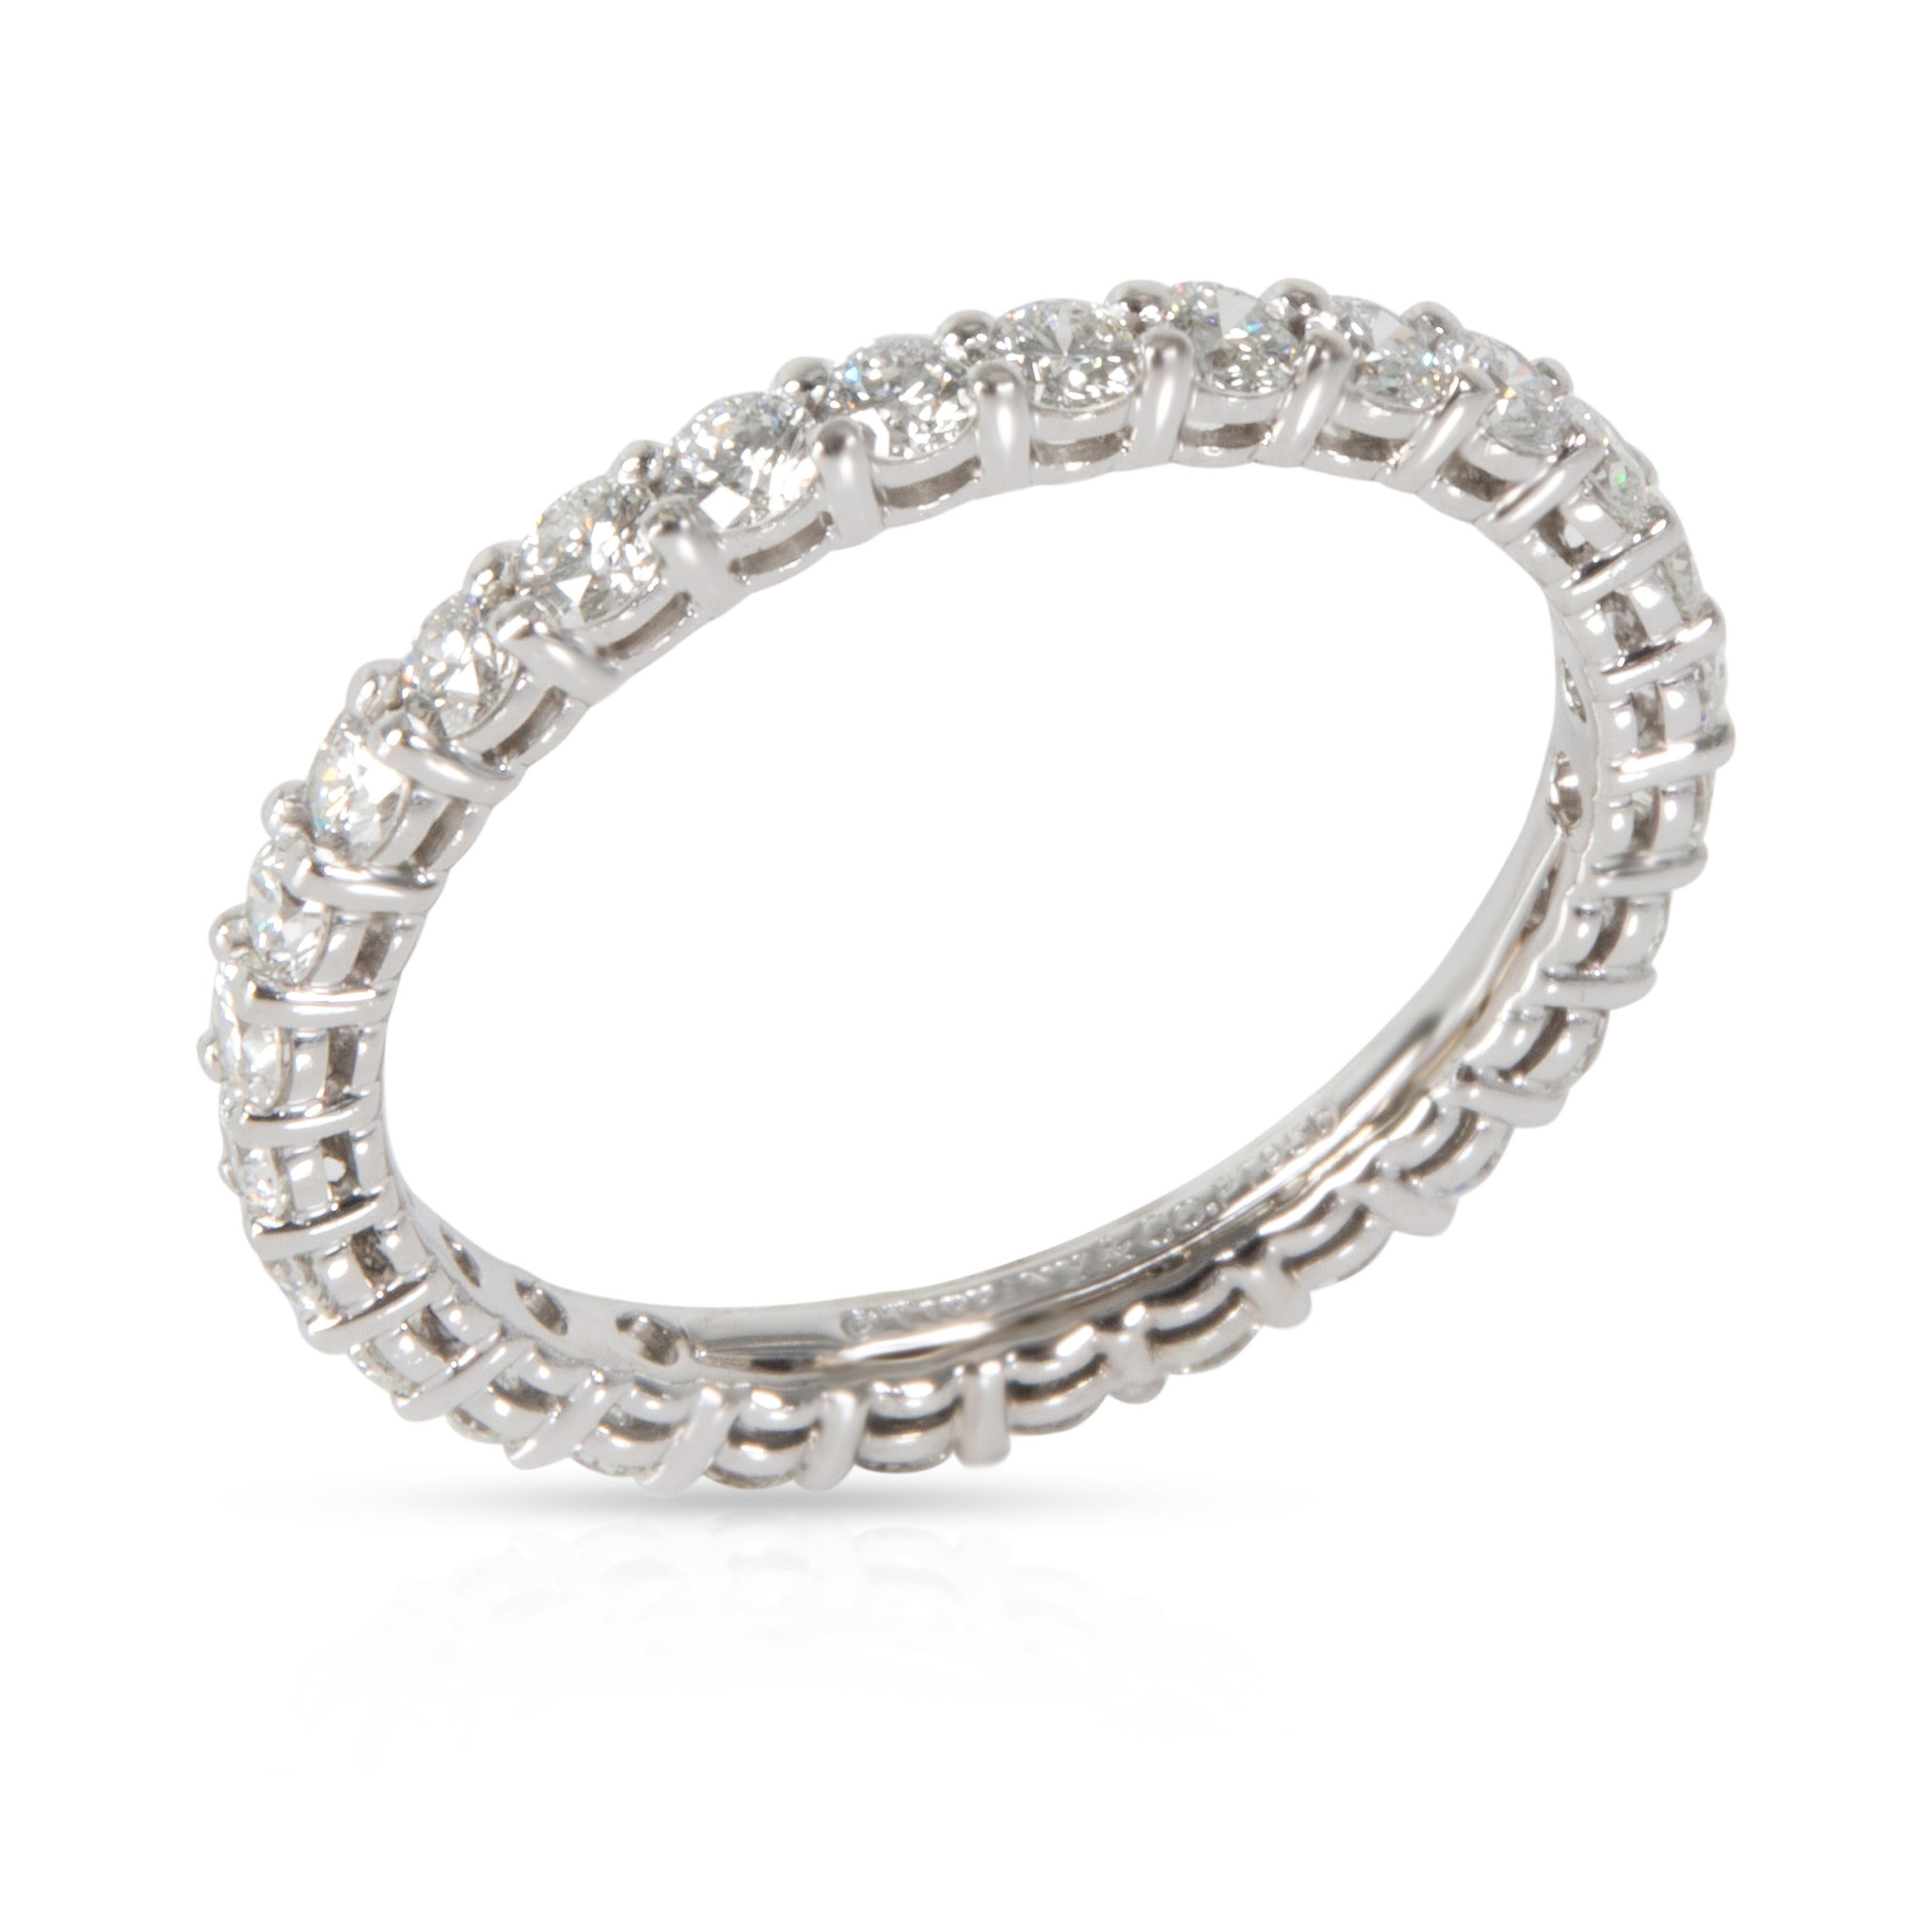 Tiffany & Co. Embrace Diamond Eternity Band in Platinum 0.85 CTW

SKU: 105163

Condition Description: Retails for 6400 USD. In excellent condition and recently polished. Ring size is 5.5. Comes with the original box.

Brand: Tiffany &